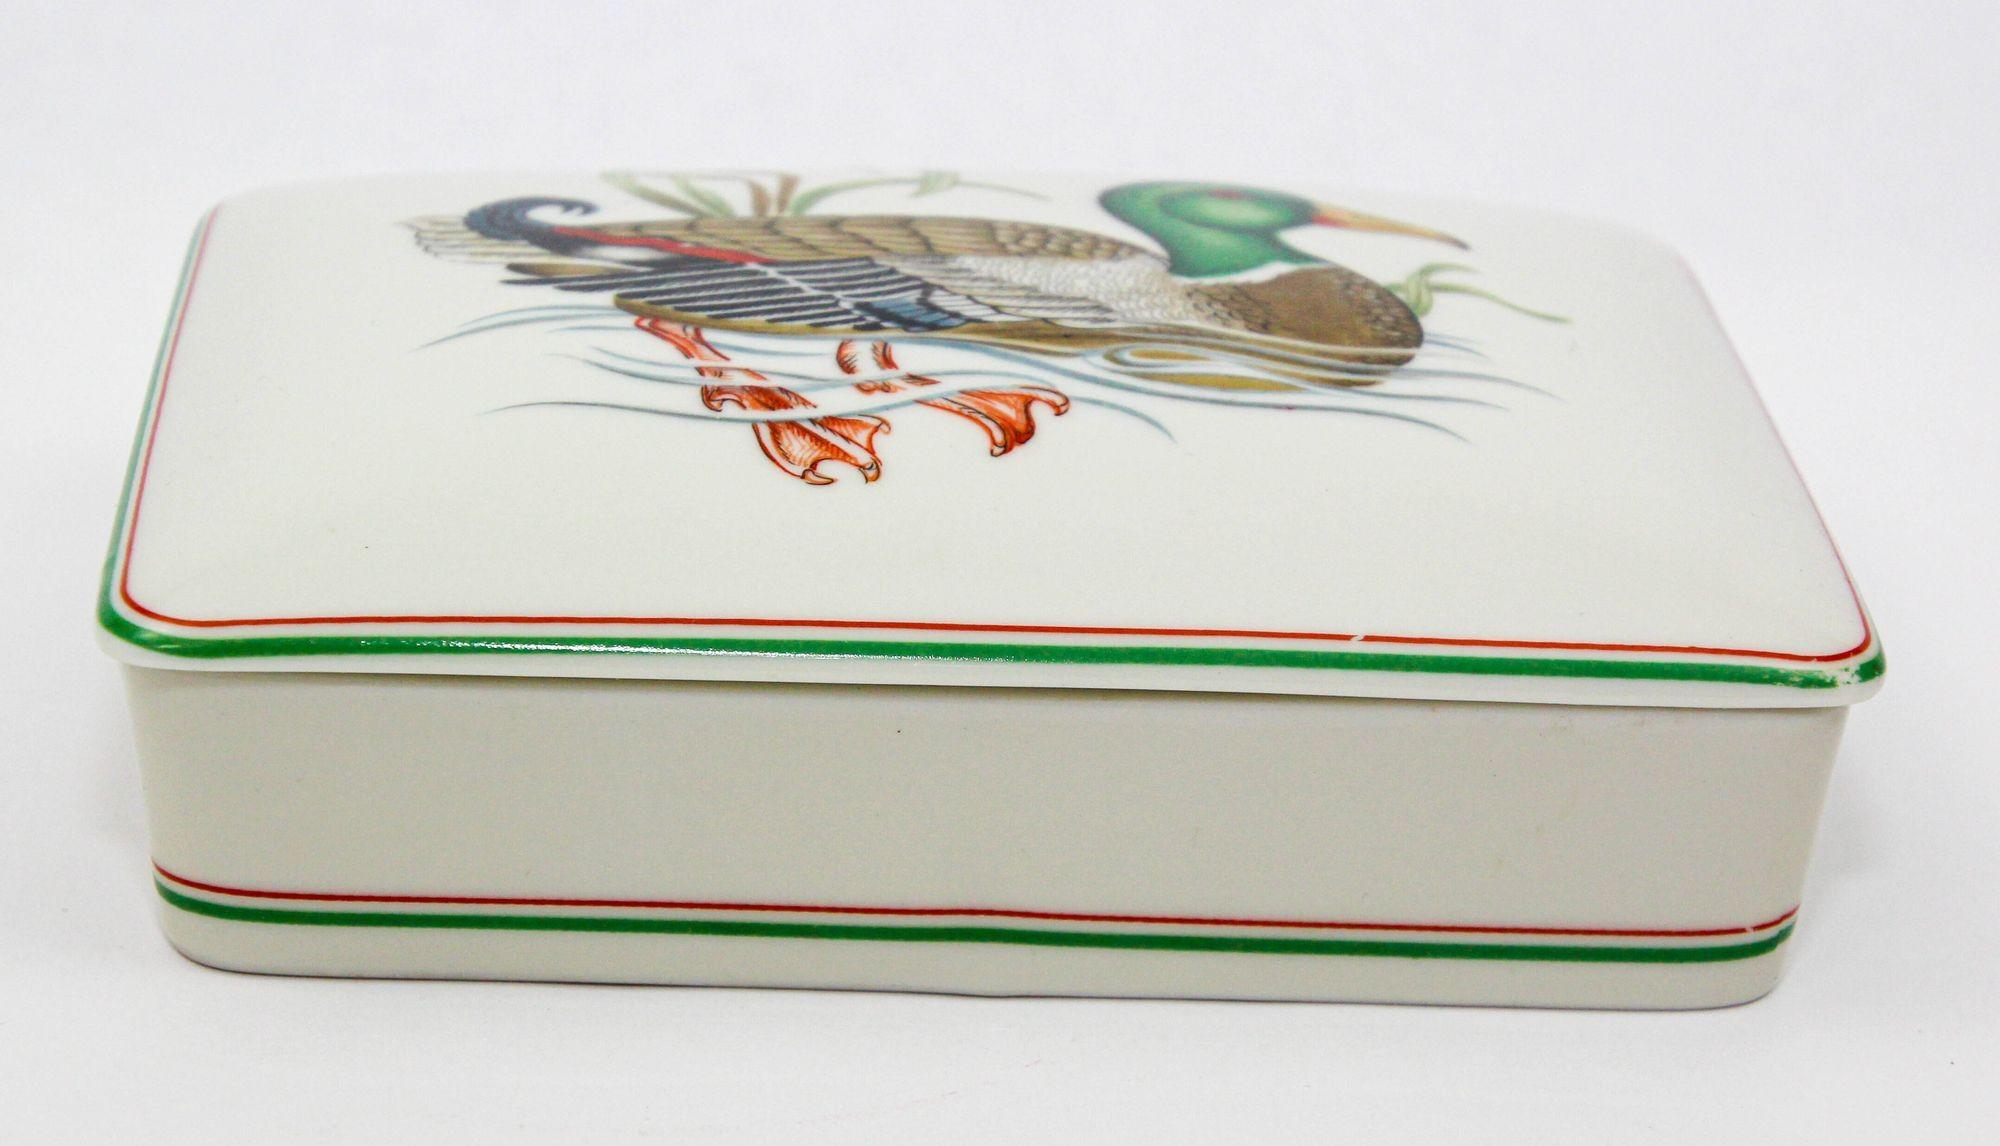 Japanese Fitz and Floyd Porcelain Box with Bridge Playing Cards 1980 Japan For Sale